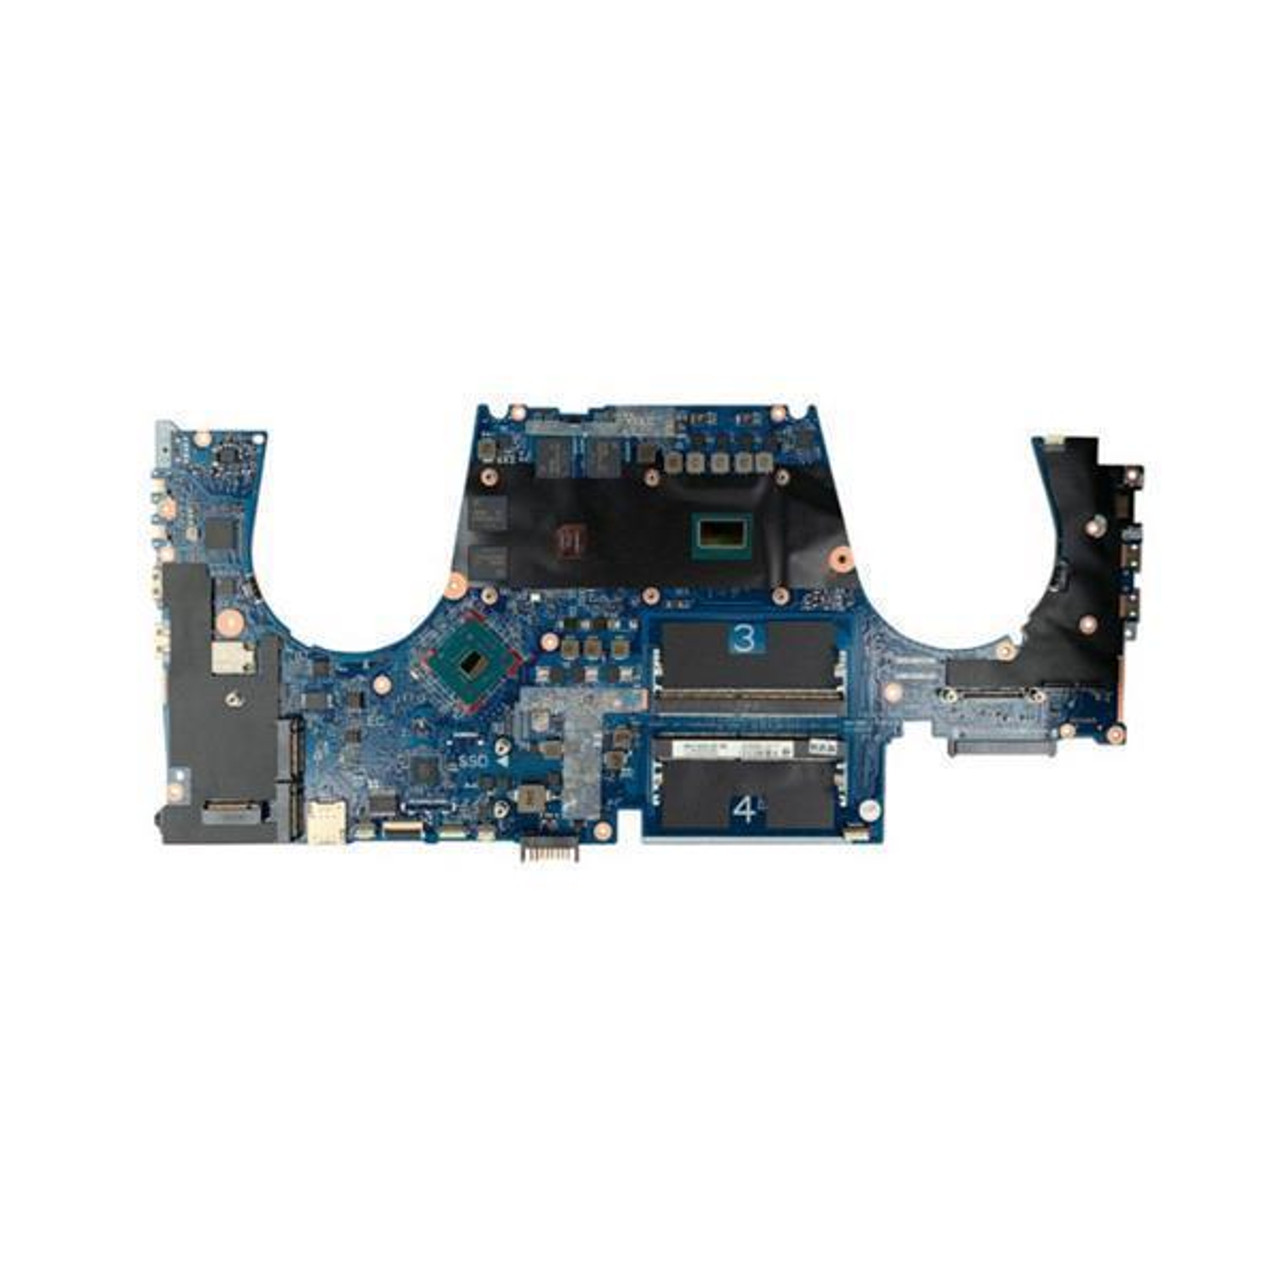 L28697-001 HP System board (Motherboard) with Intel Core i5-8400H processor and NVIDIA Quadro P2000 graphics for ZBook 15 G5 (Refurbished)